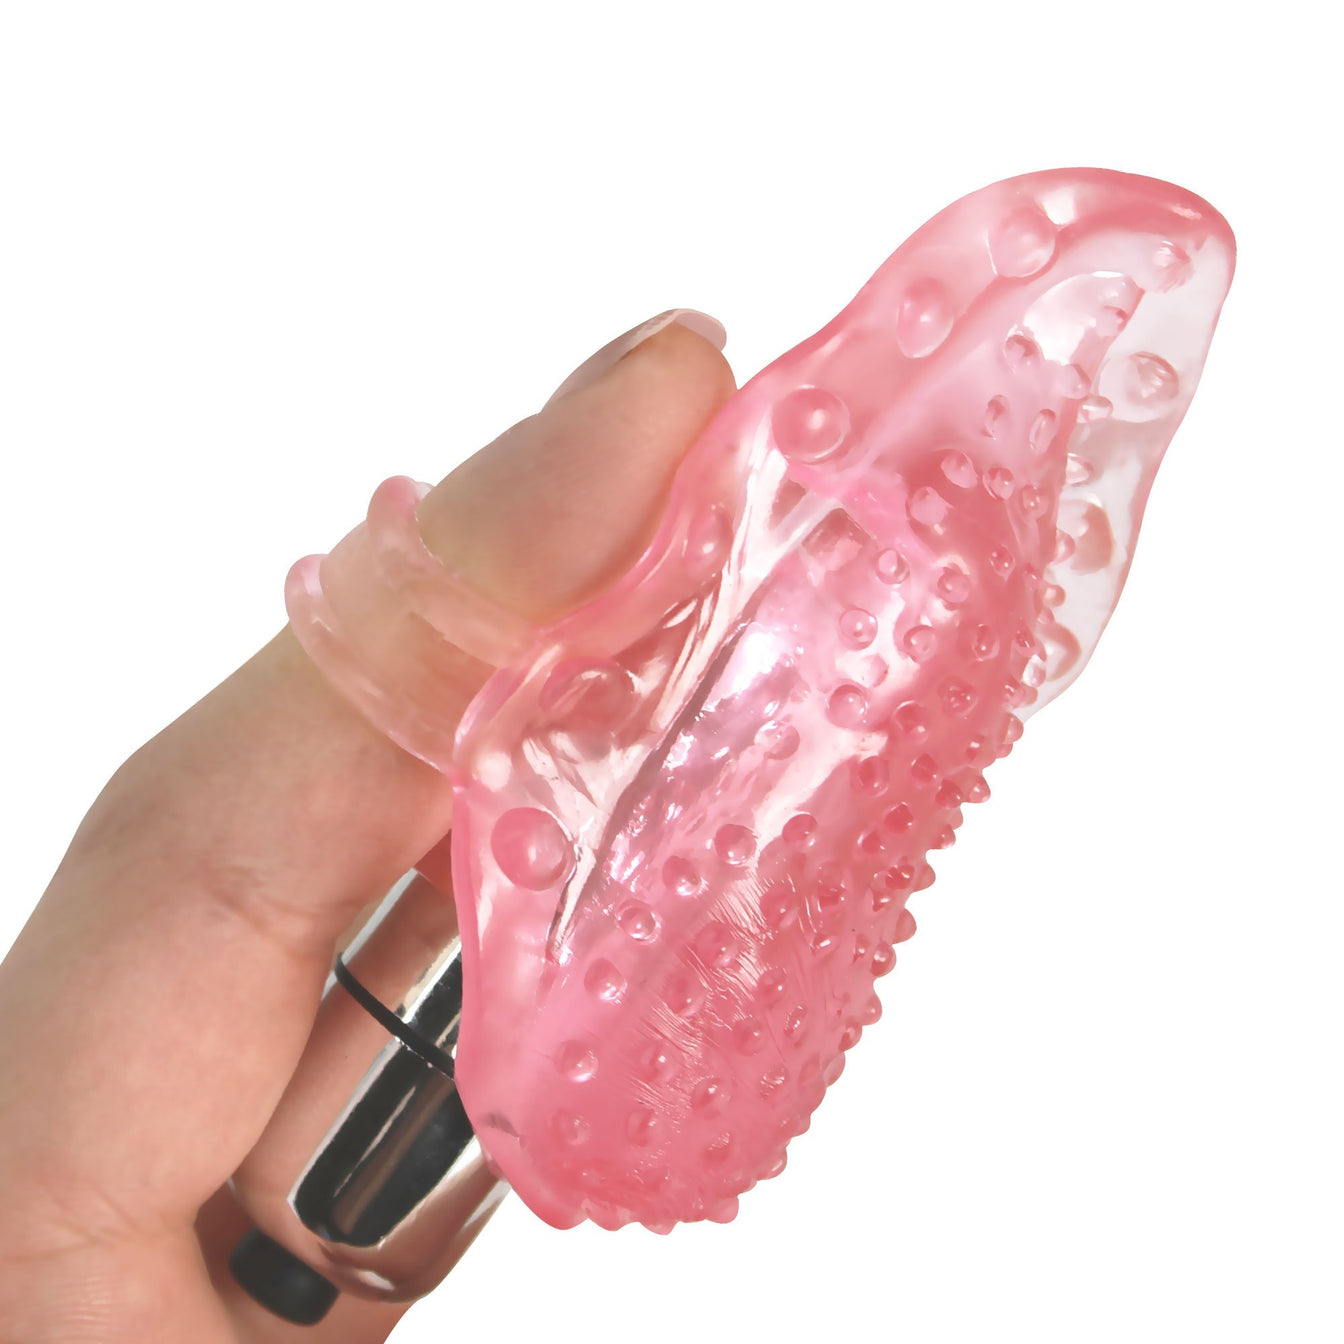 Finger using this tongue sleeve over a vibrating bullet